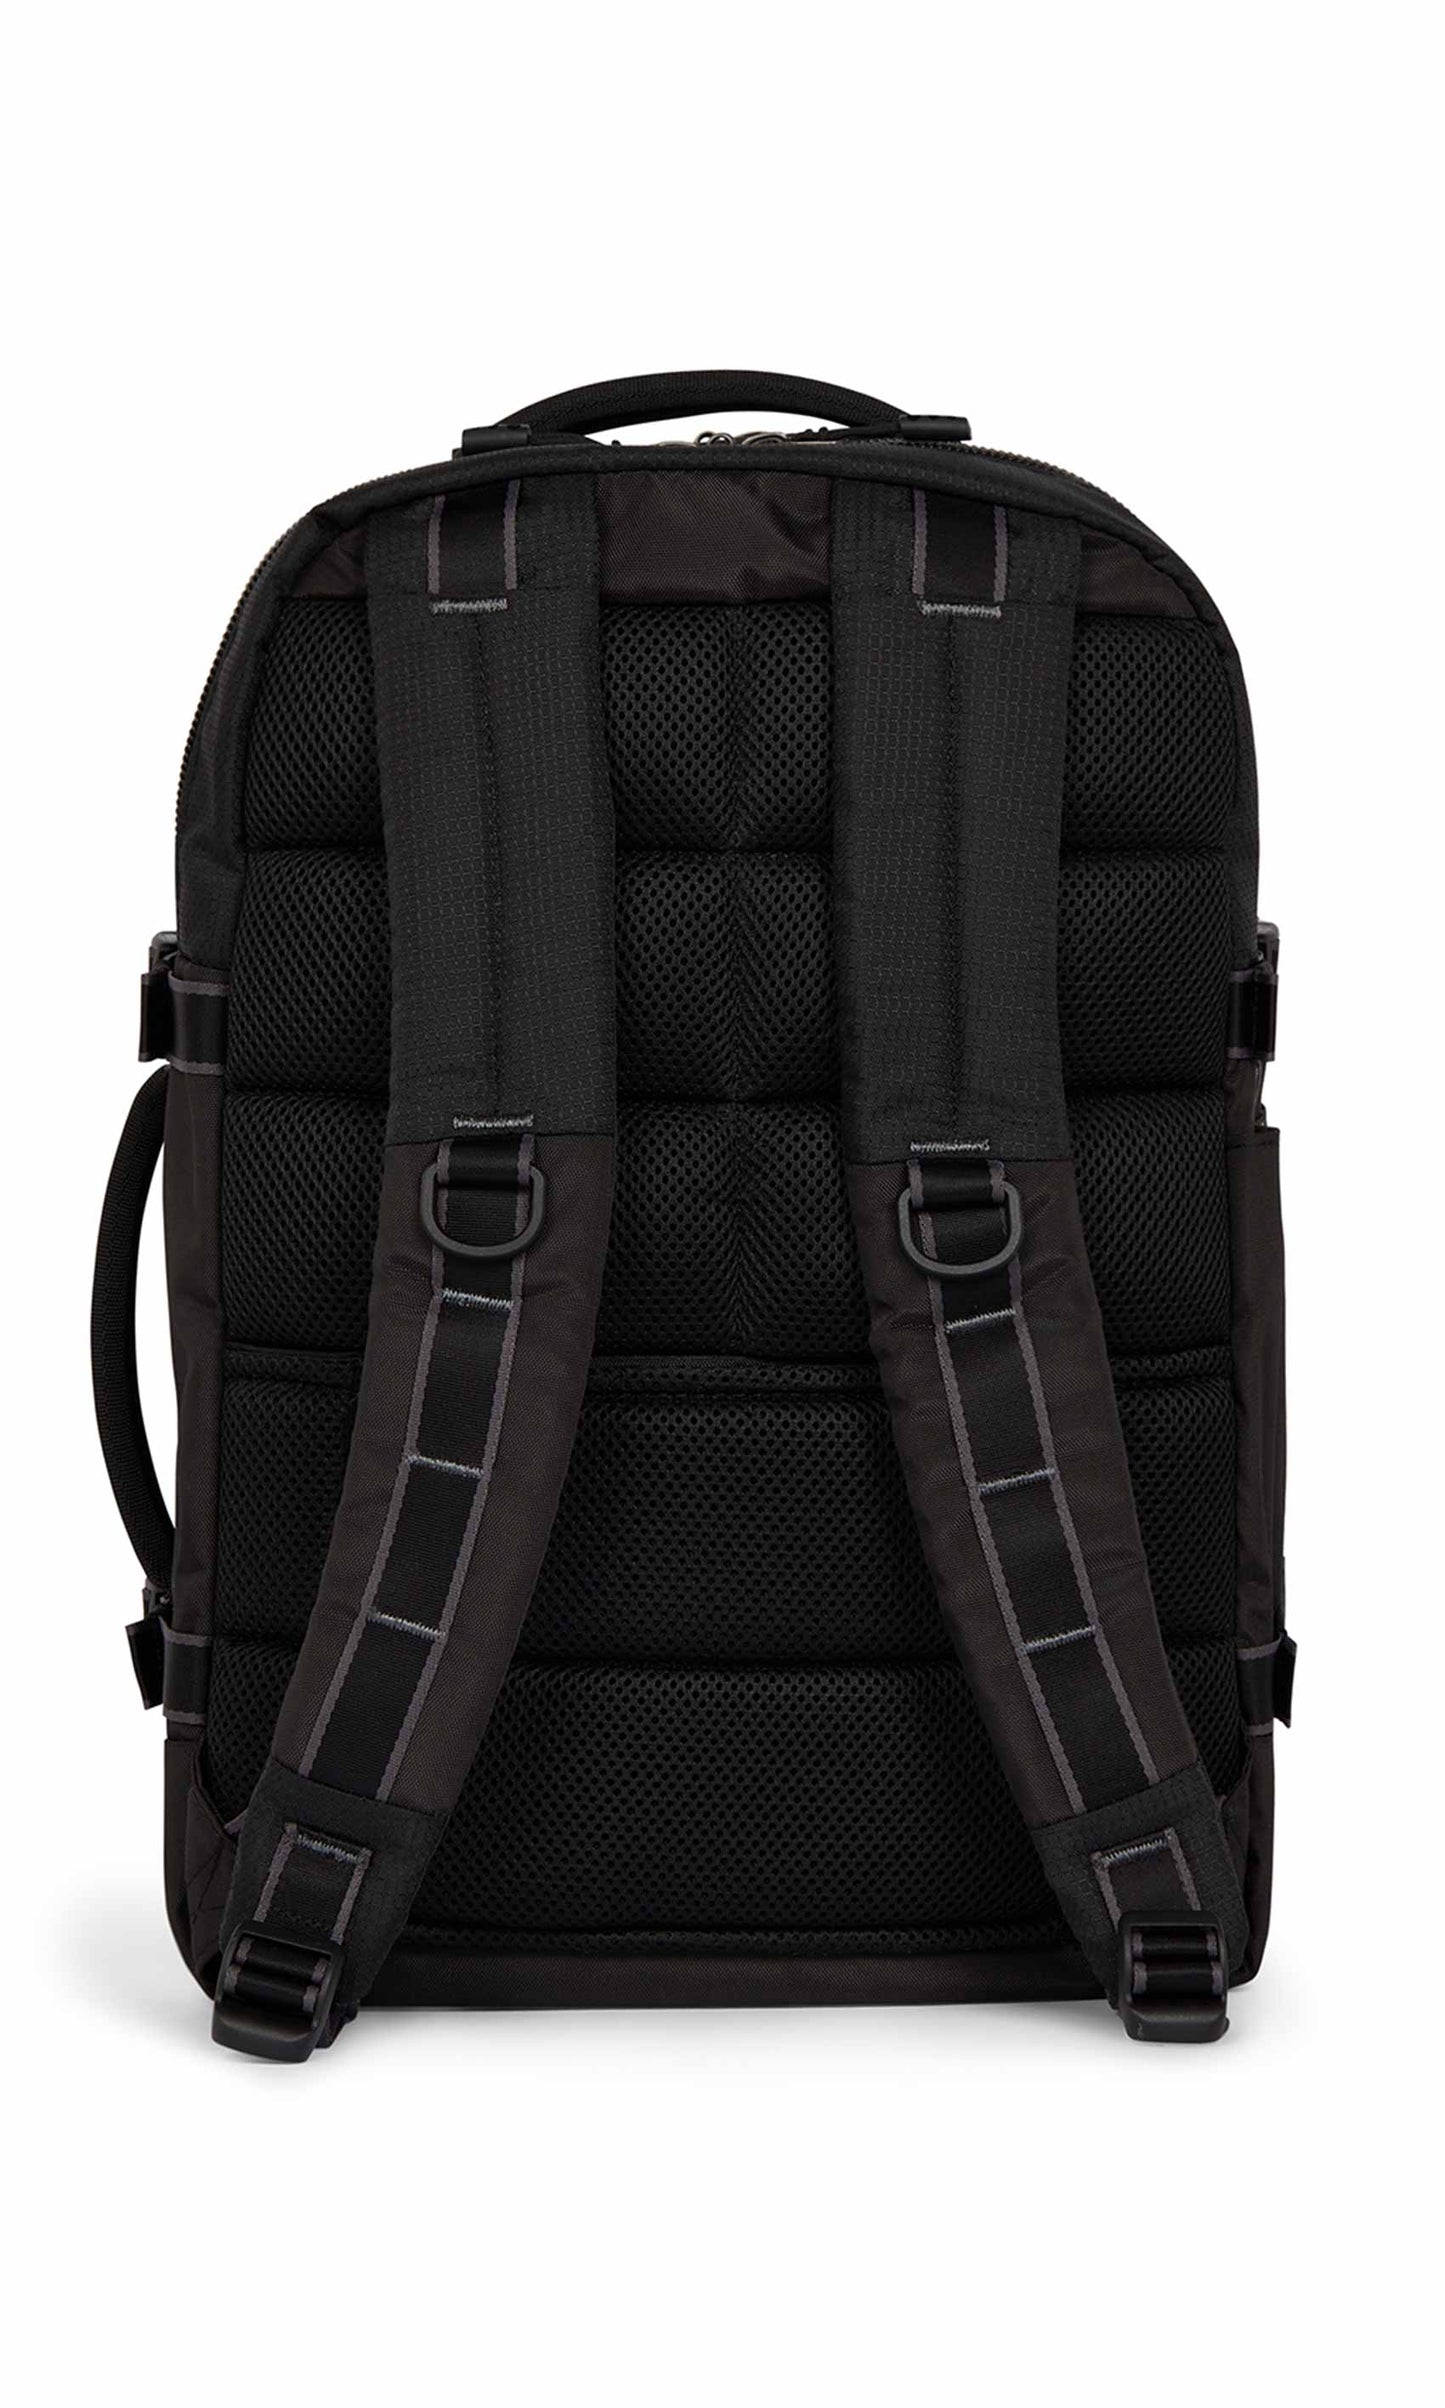 Bamburgh expandable backpack in black